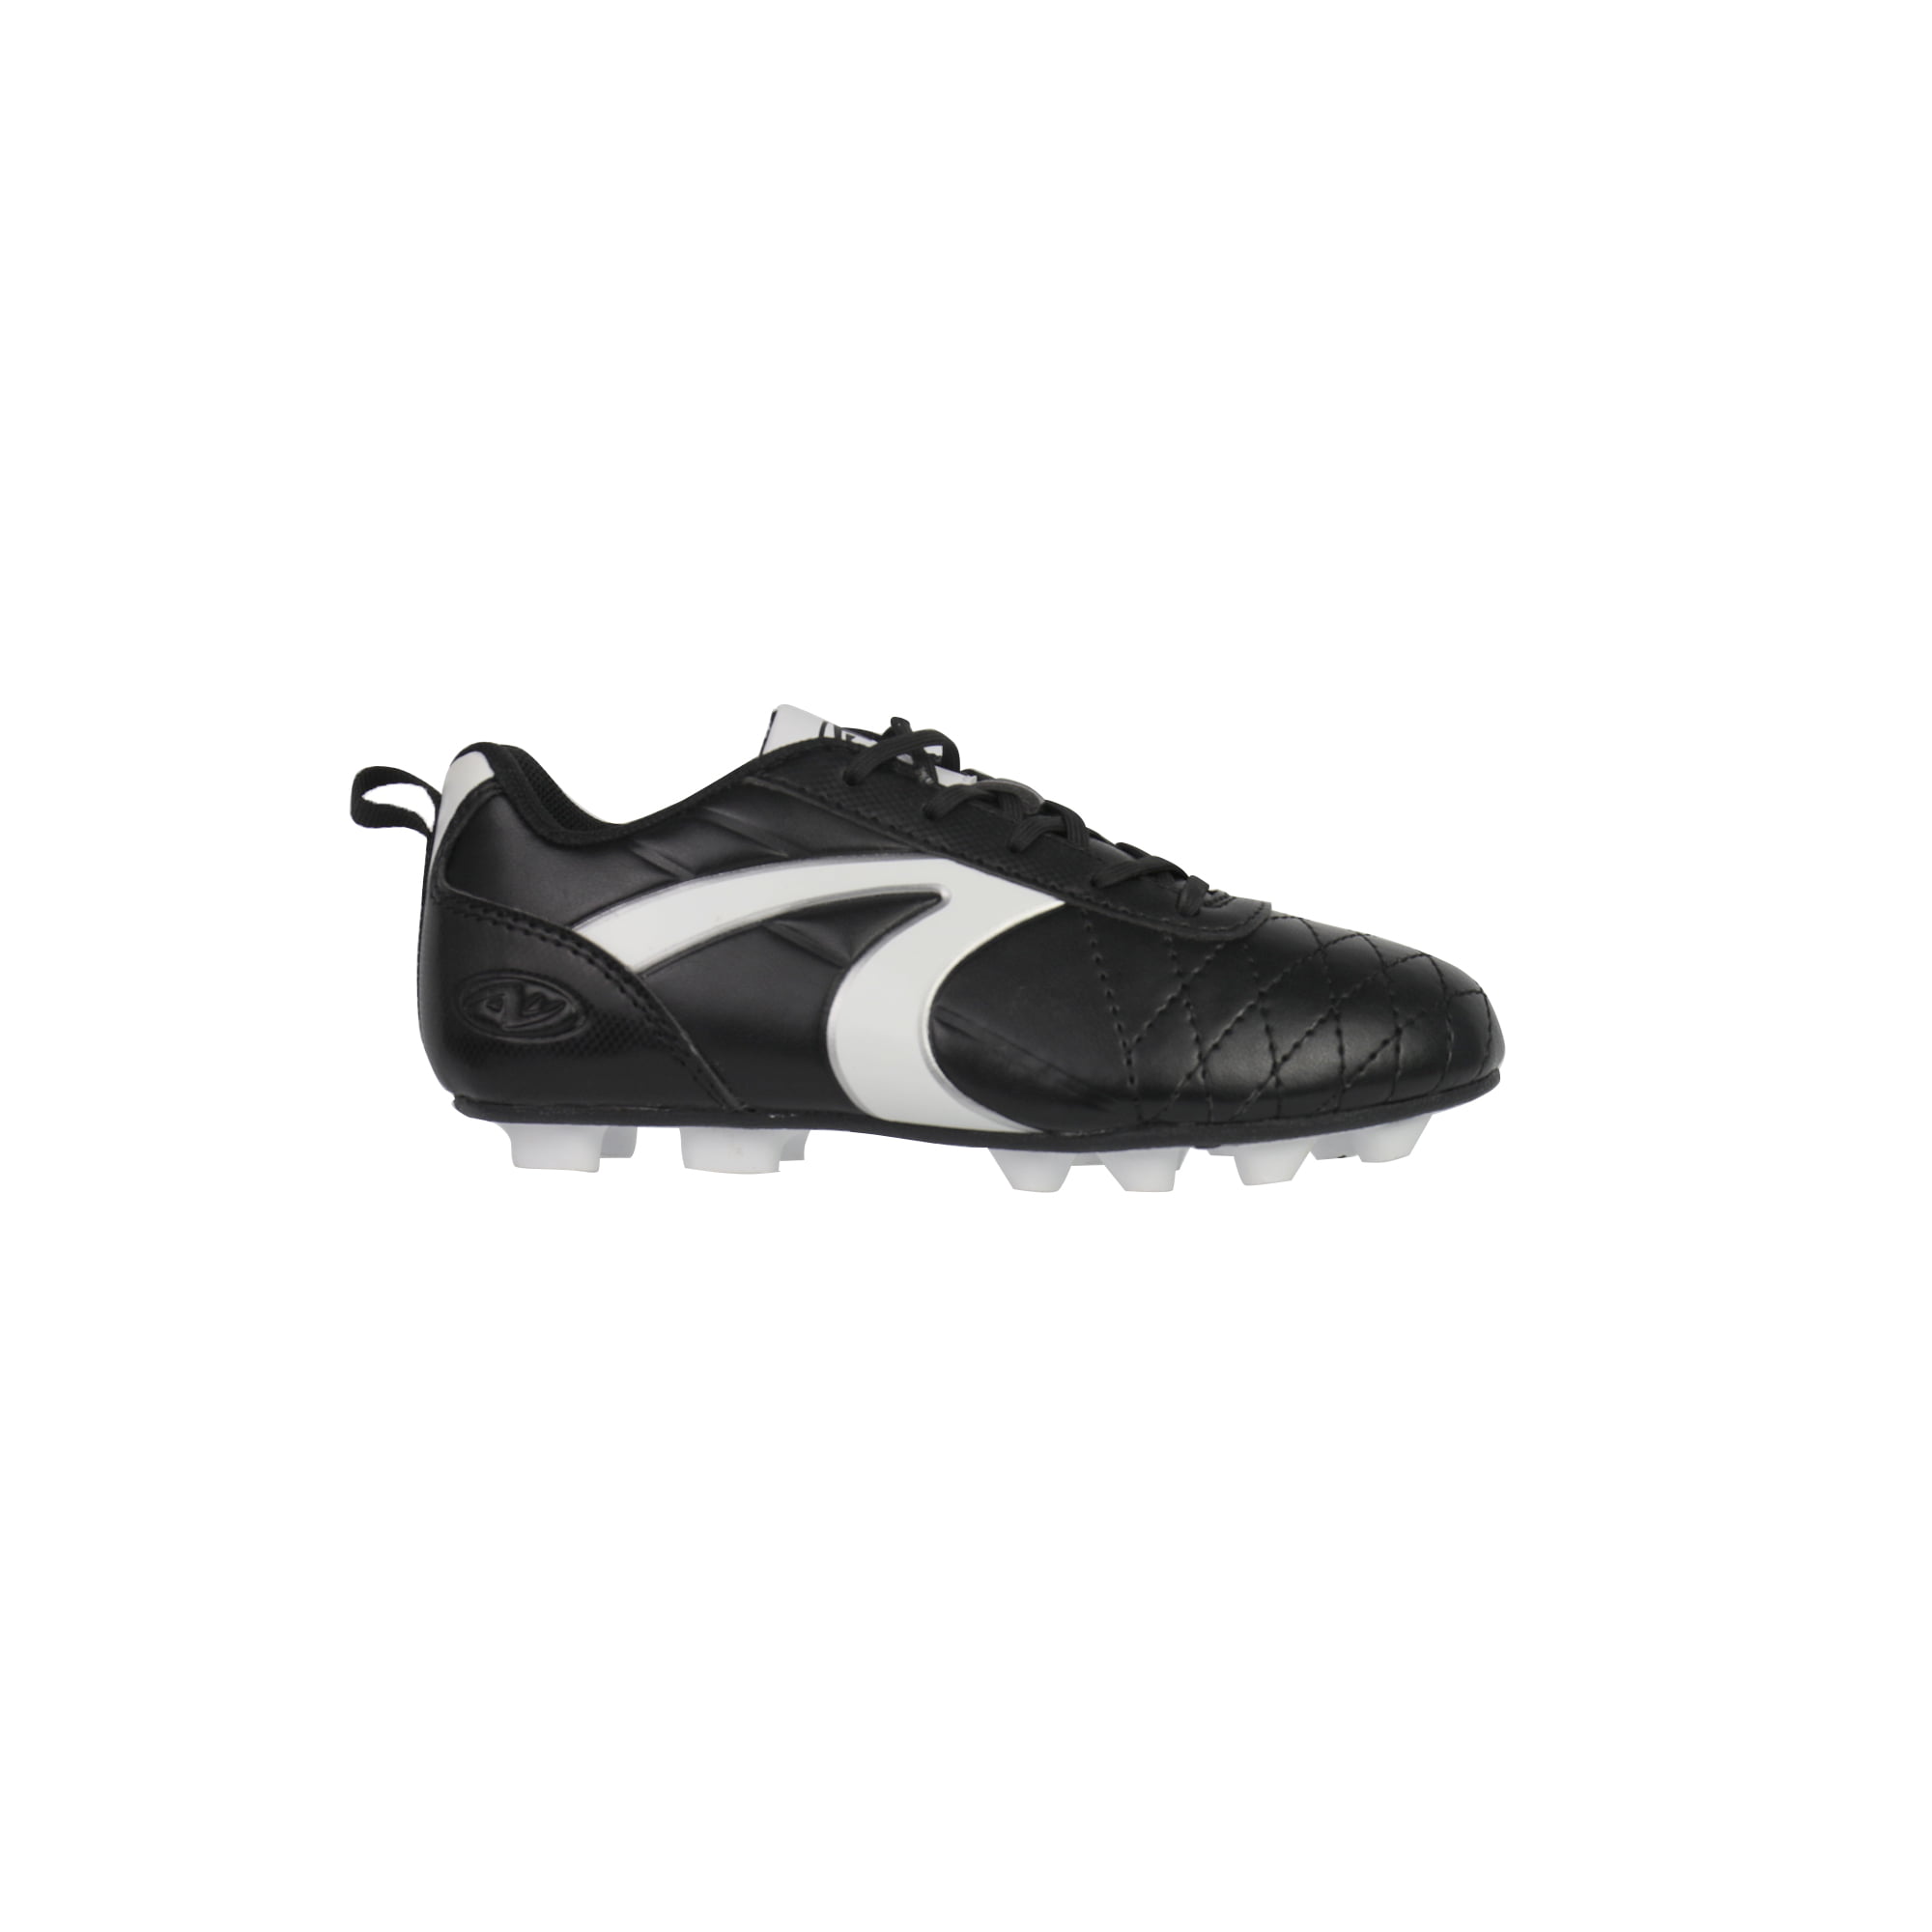 Starter Boys Soccer Cleats NWT Size 5 Black White Youth Sidewinder 